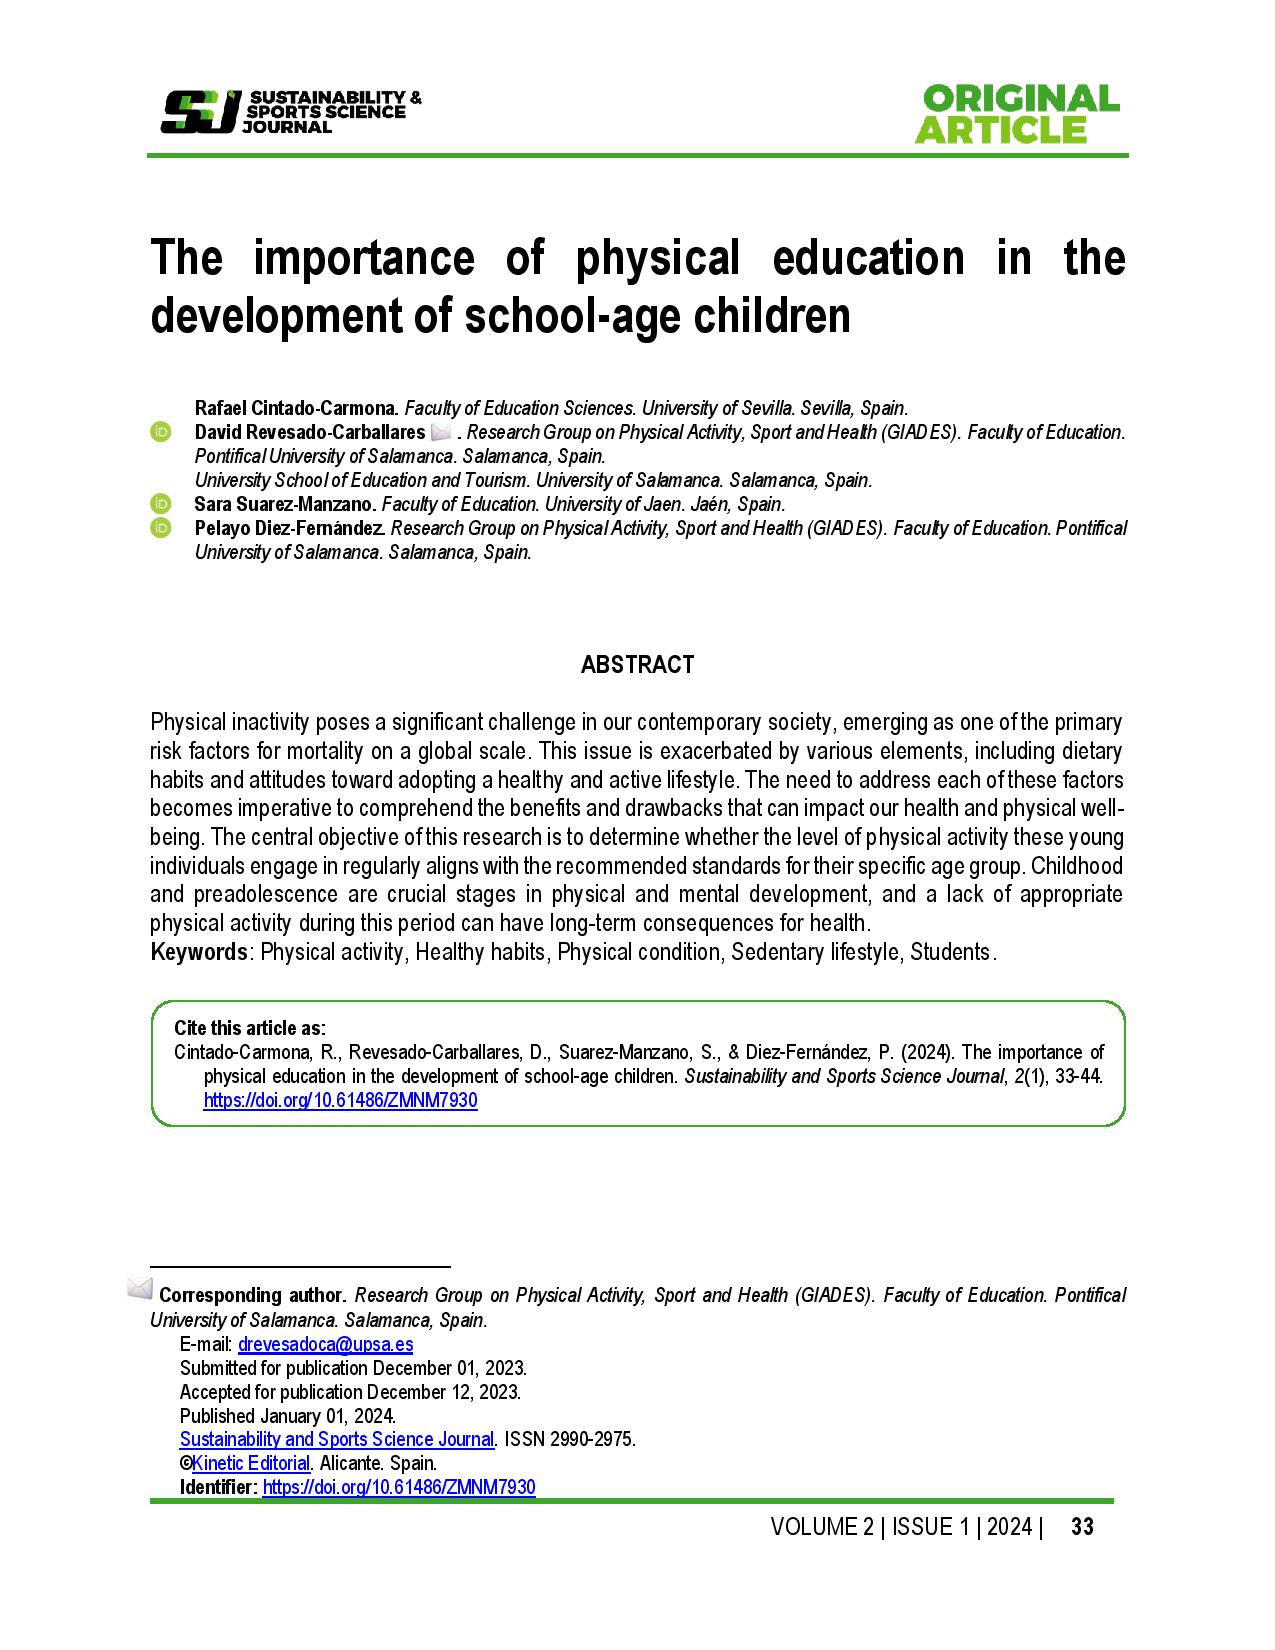 The importance of physical education in the development of school-age children